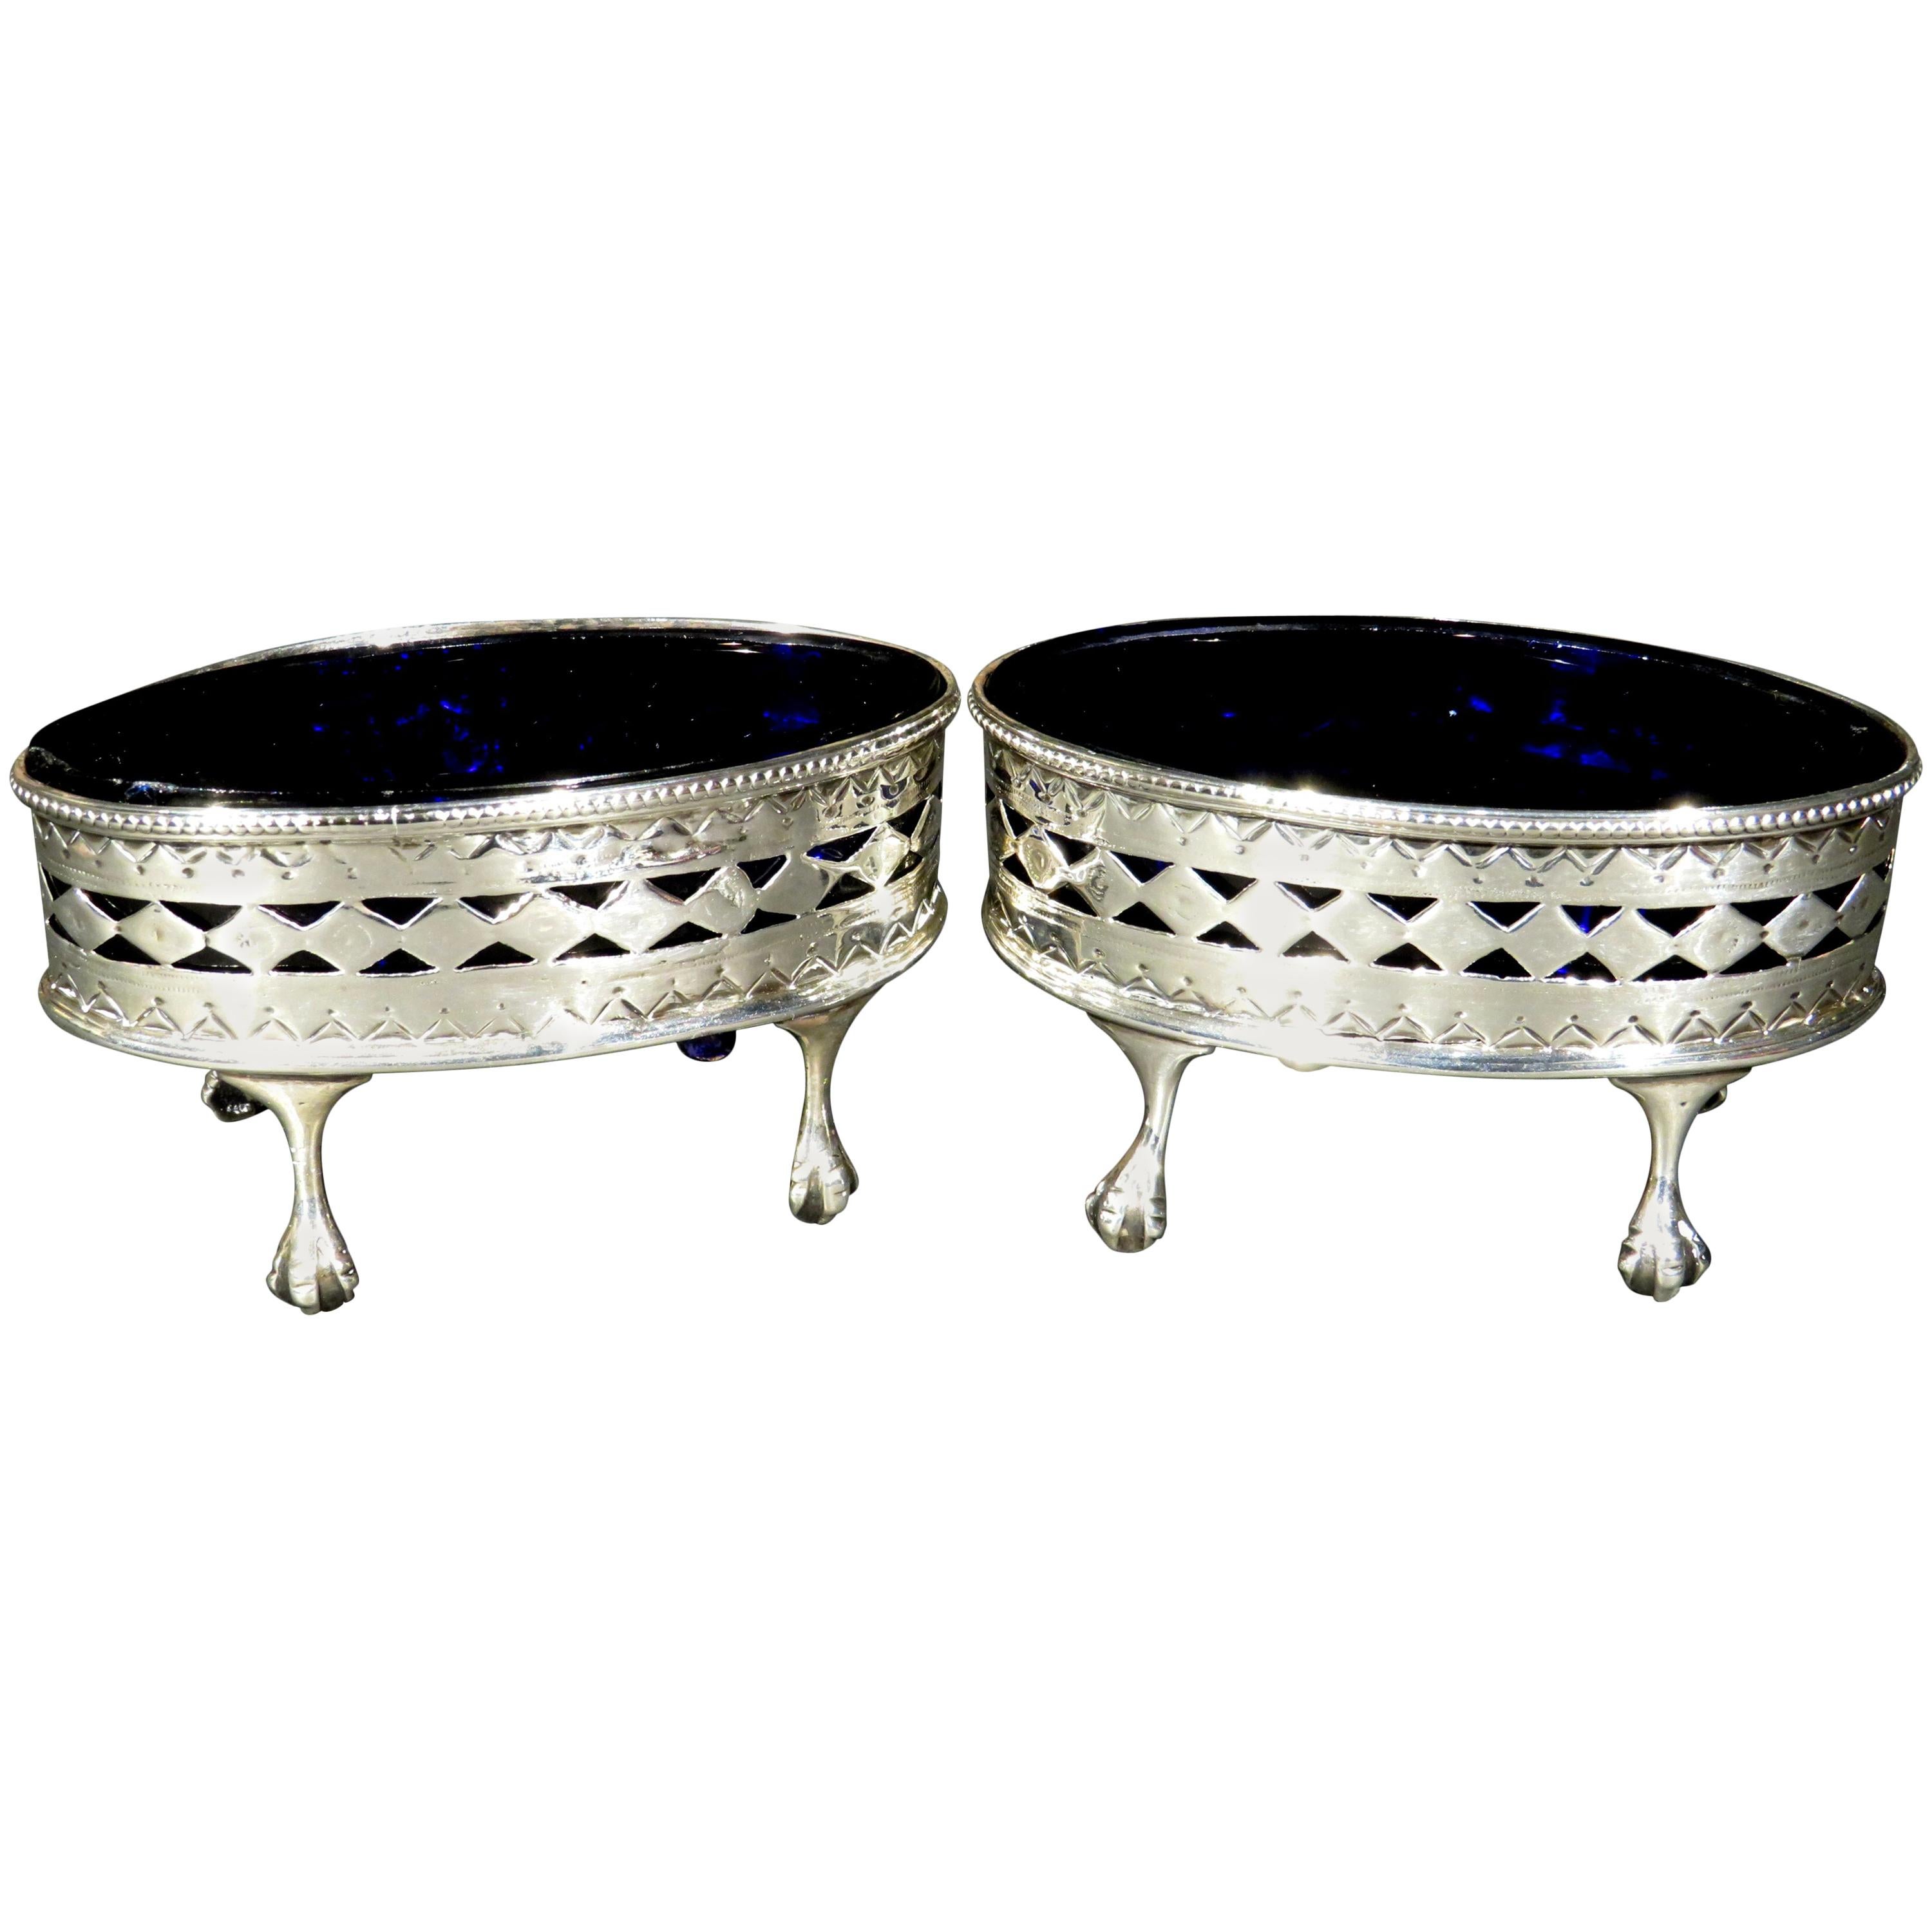 Very Good Pair of 18th Century Sterling Silver Open Salts, London 1789